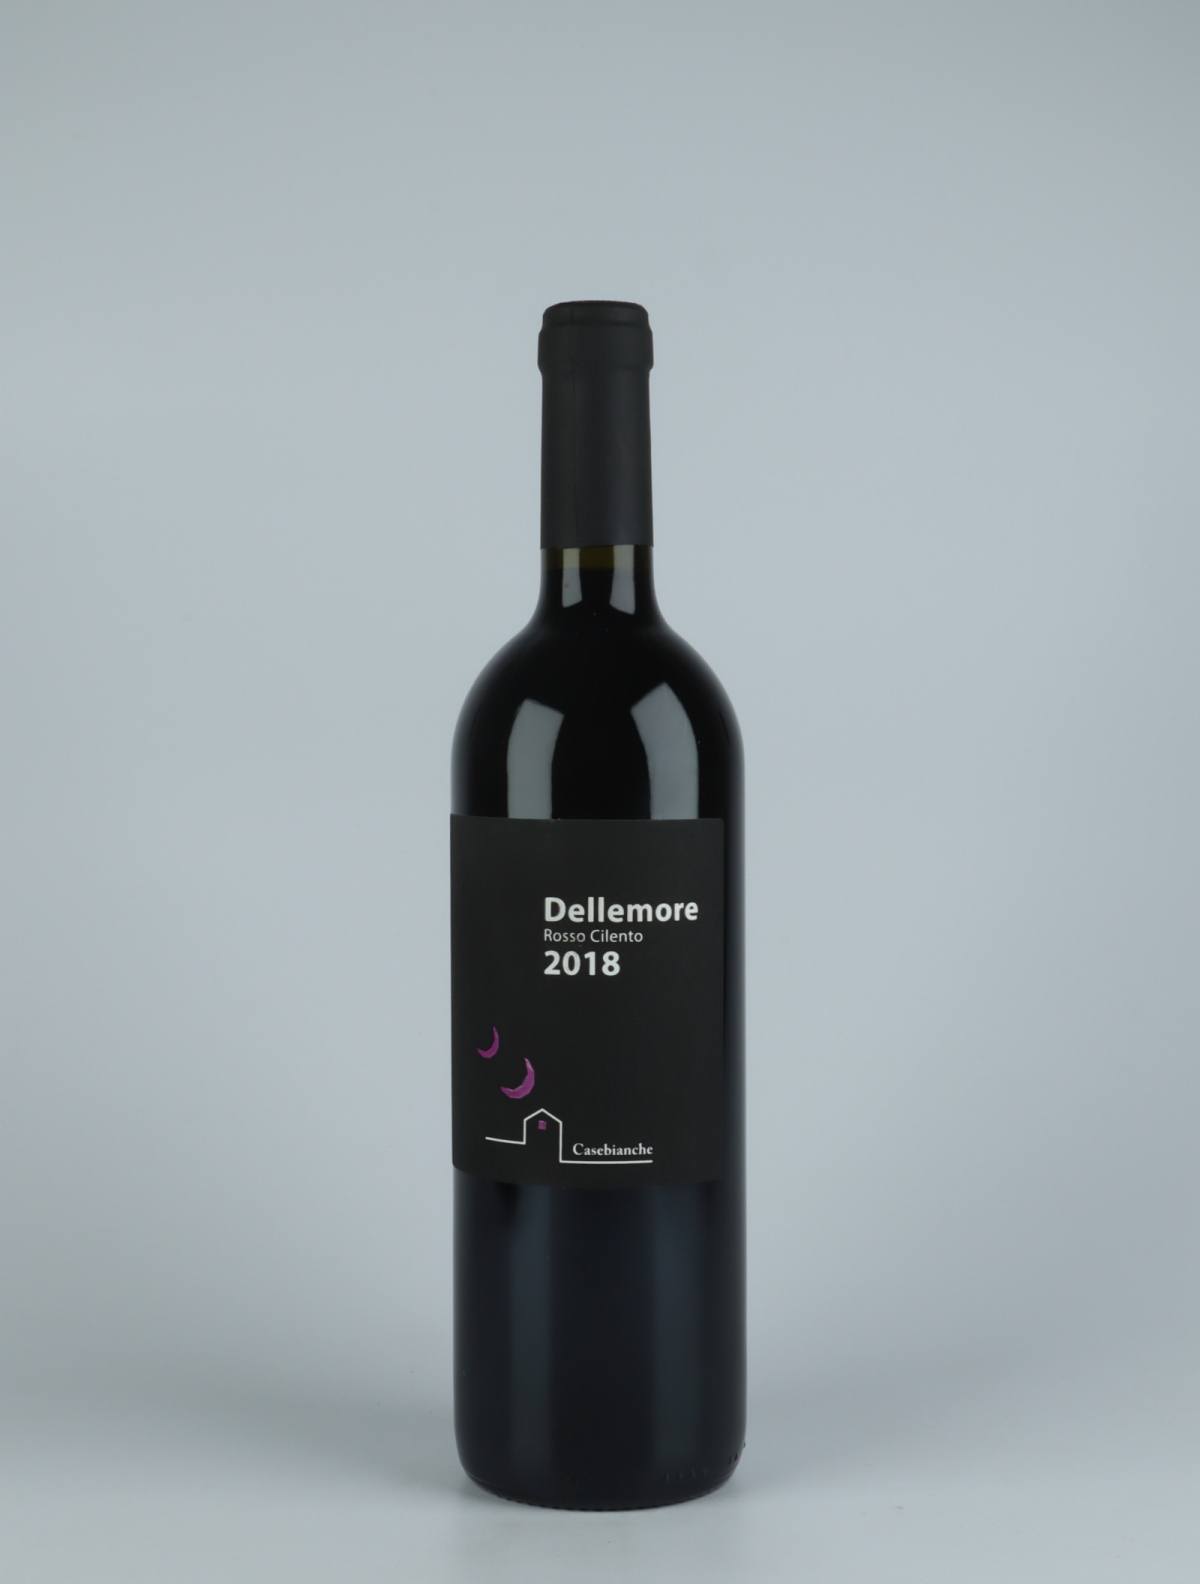 A bottle 2018 Dellemore Red wine from Casebianche, Campania in Italy